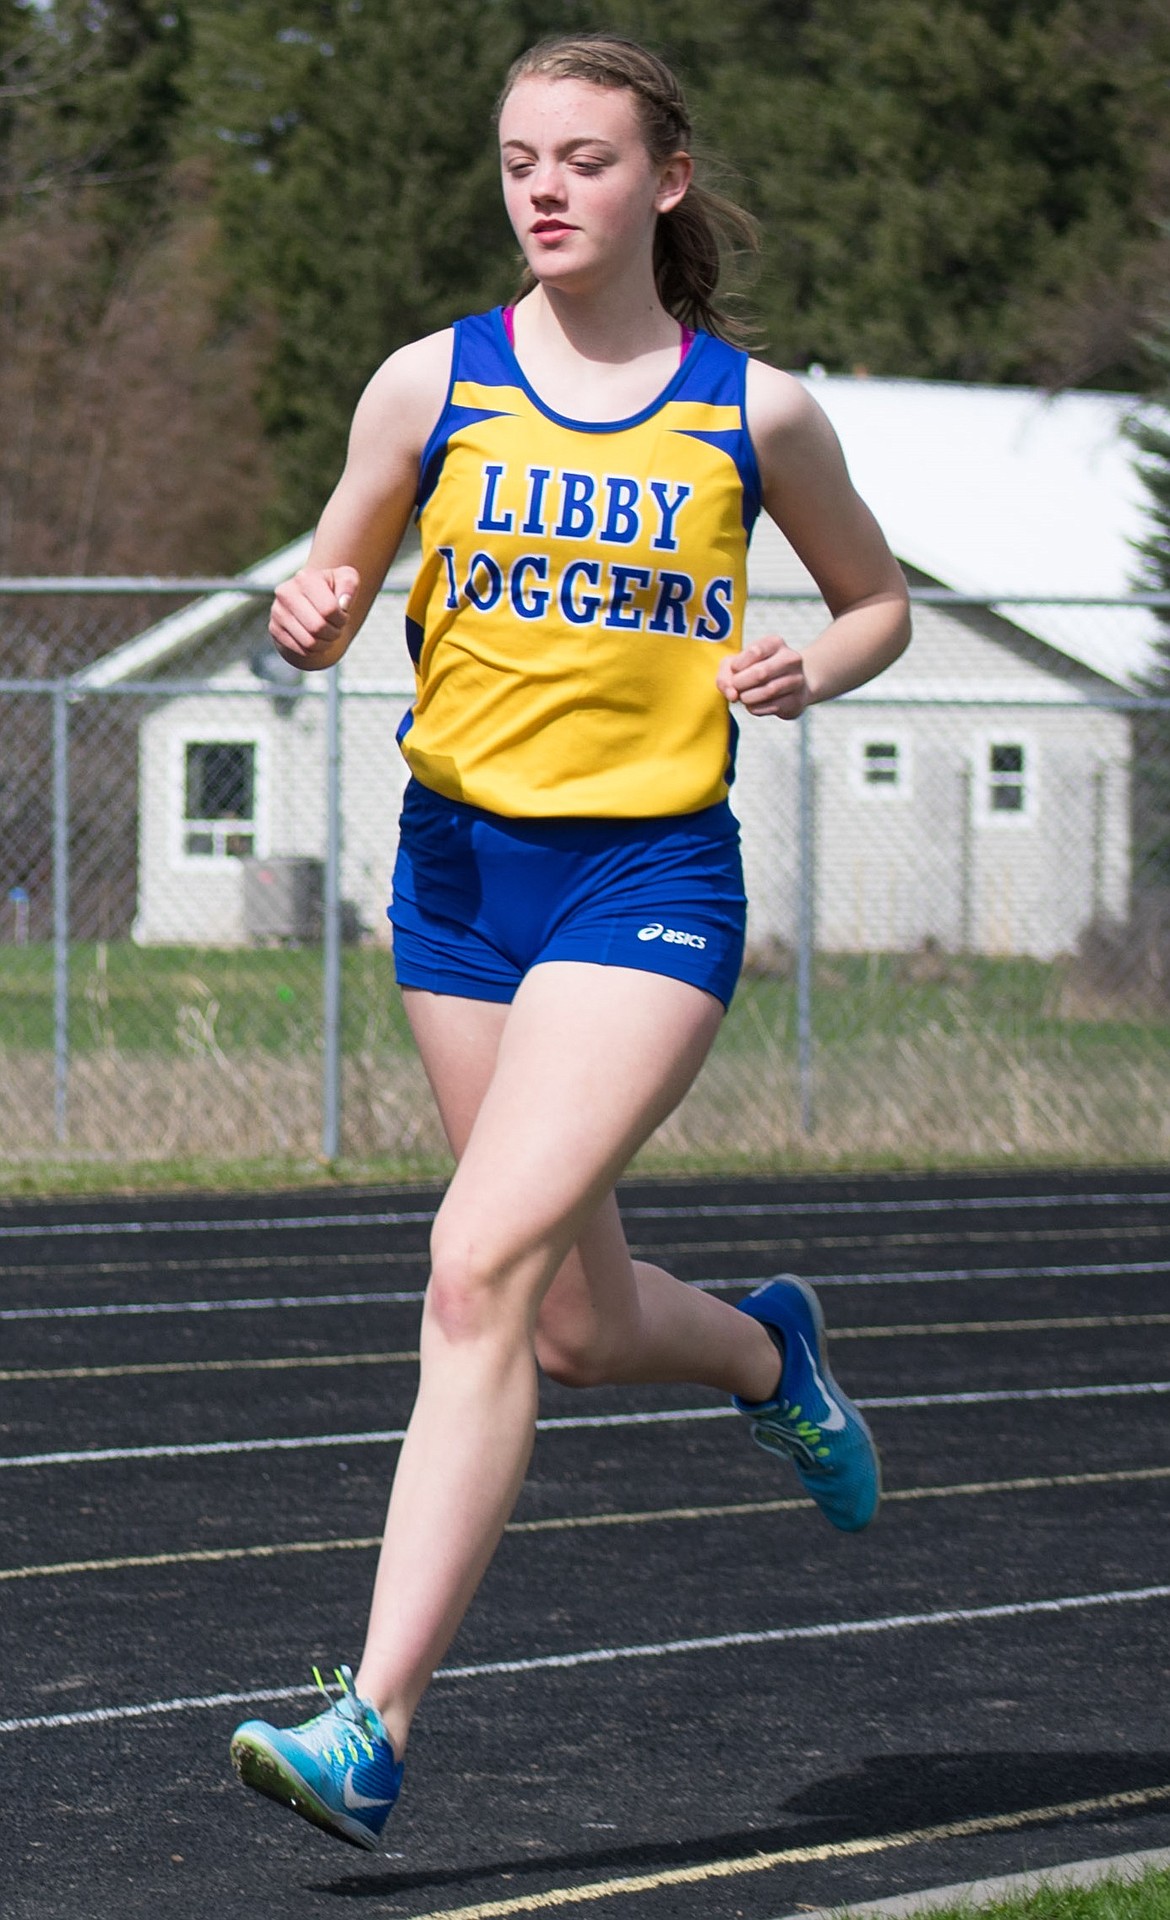 Pictured here running the 1,600m where she placed second with a 6:18.08, Libby junior Lauren Thorstenson also placed first in the 3,200m with a 13:16.47. (Ben Kibbey/The Western News)